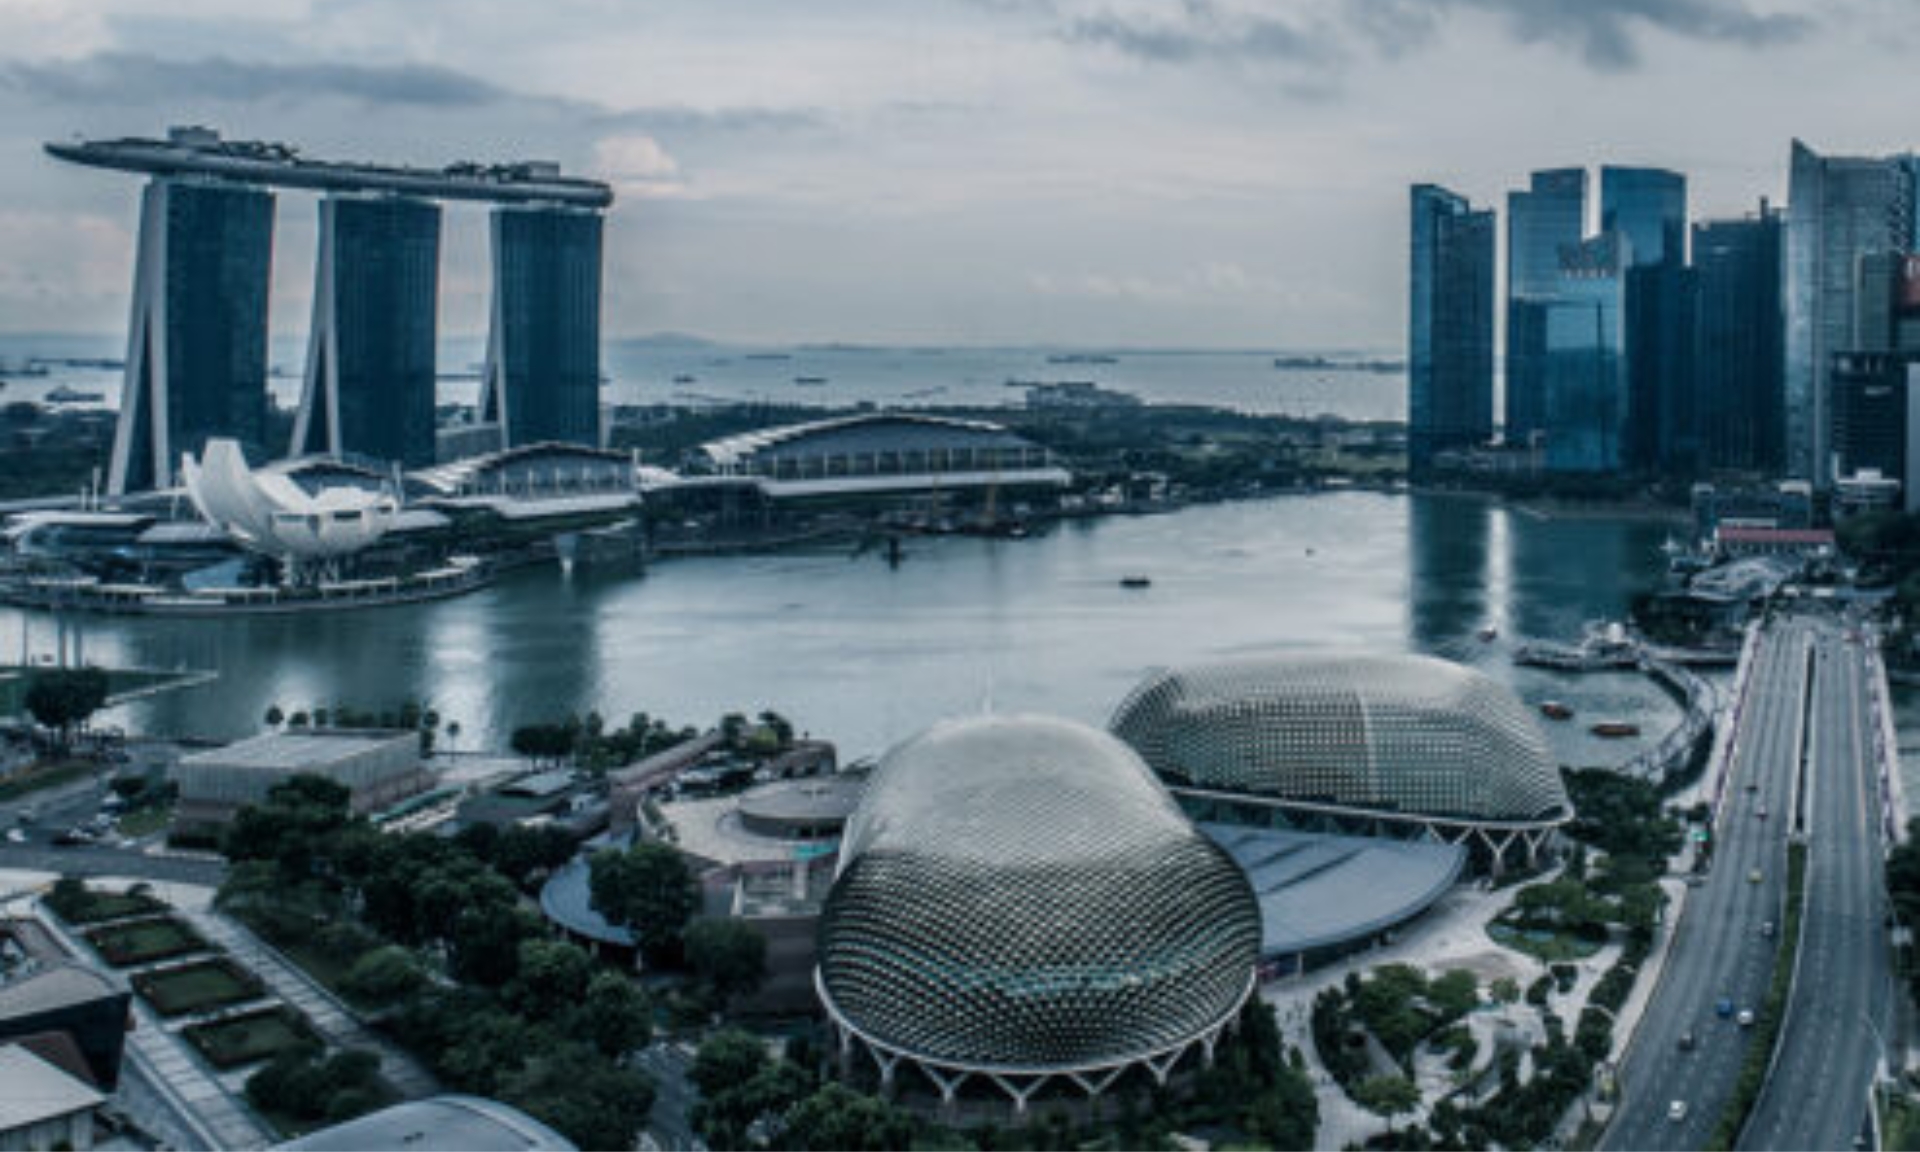 MAS published the findings of a government-wide review into Singapore’s financial sector and its potential exposure to crimes